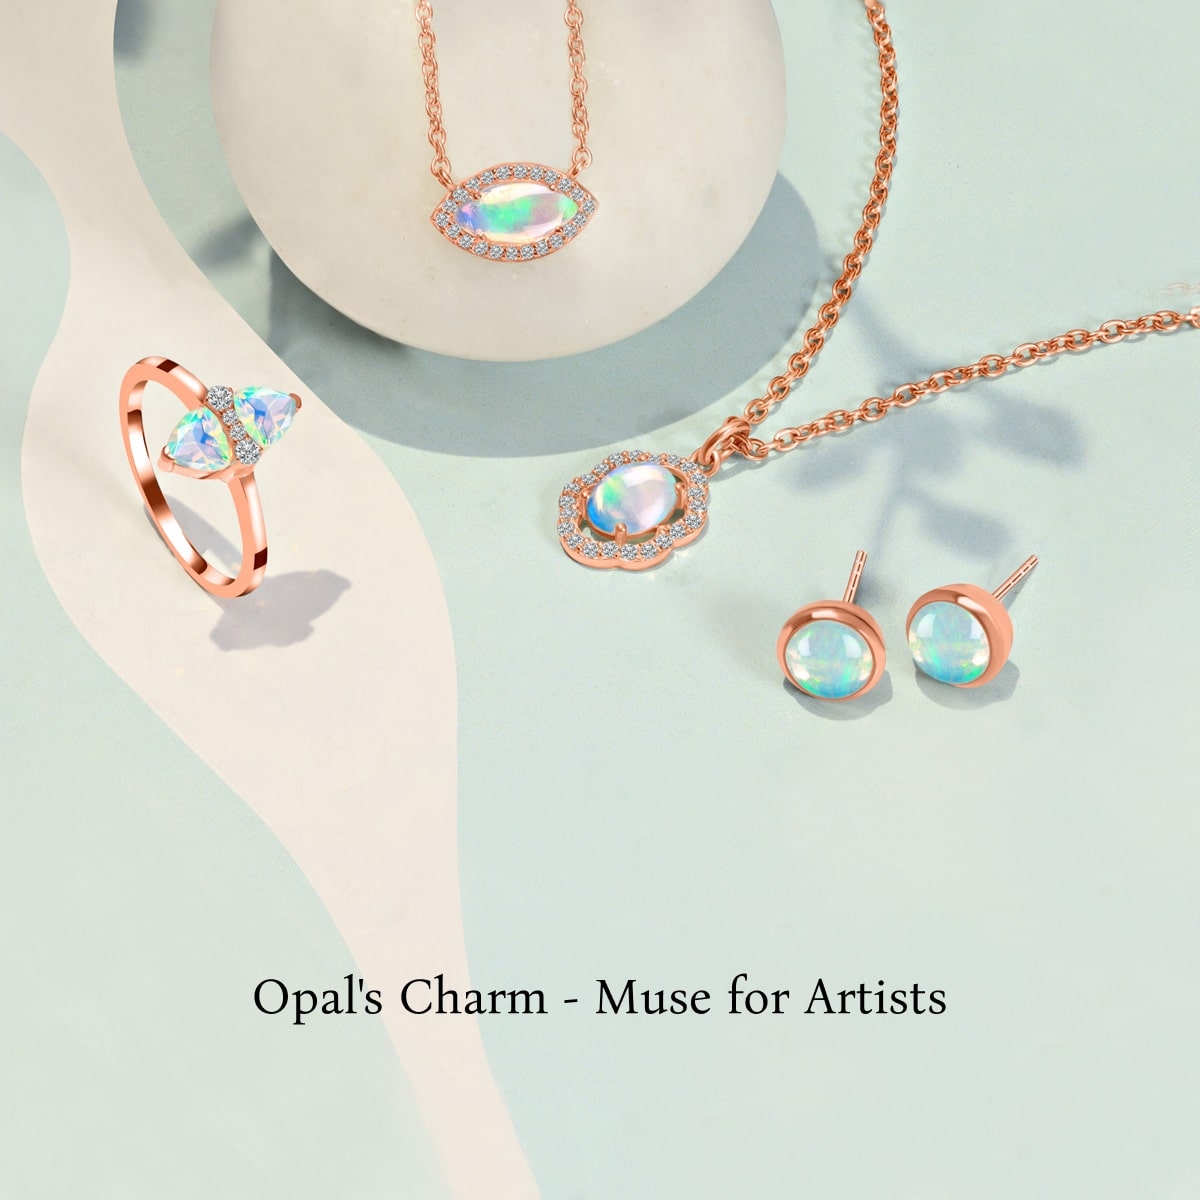 Opals: Today's Timeless Treasures